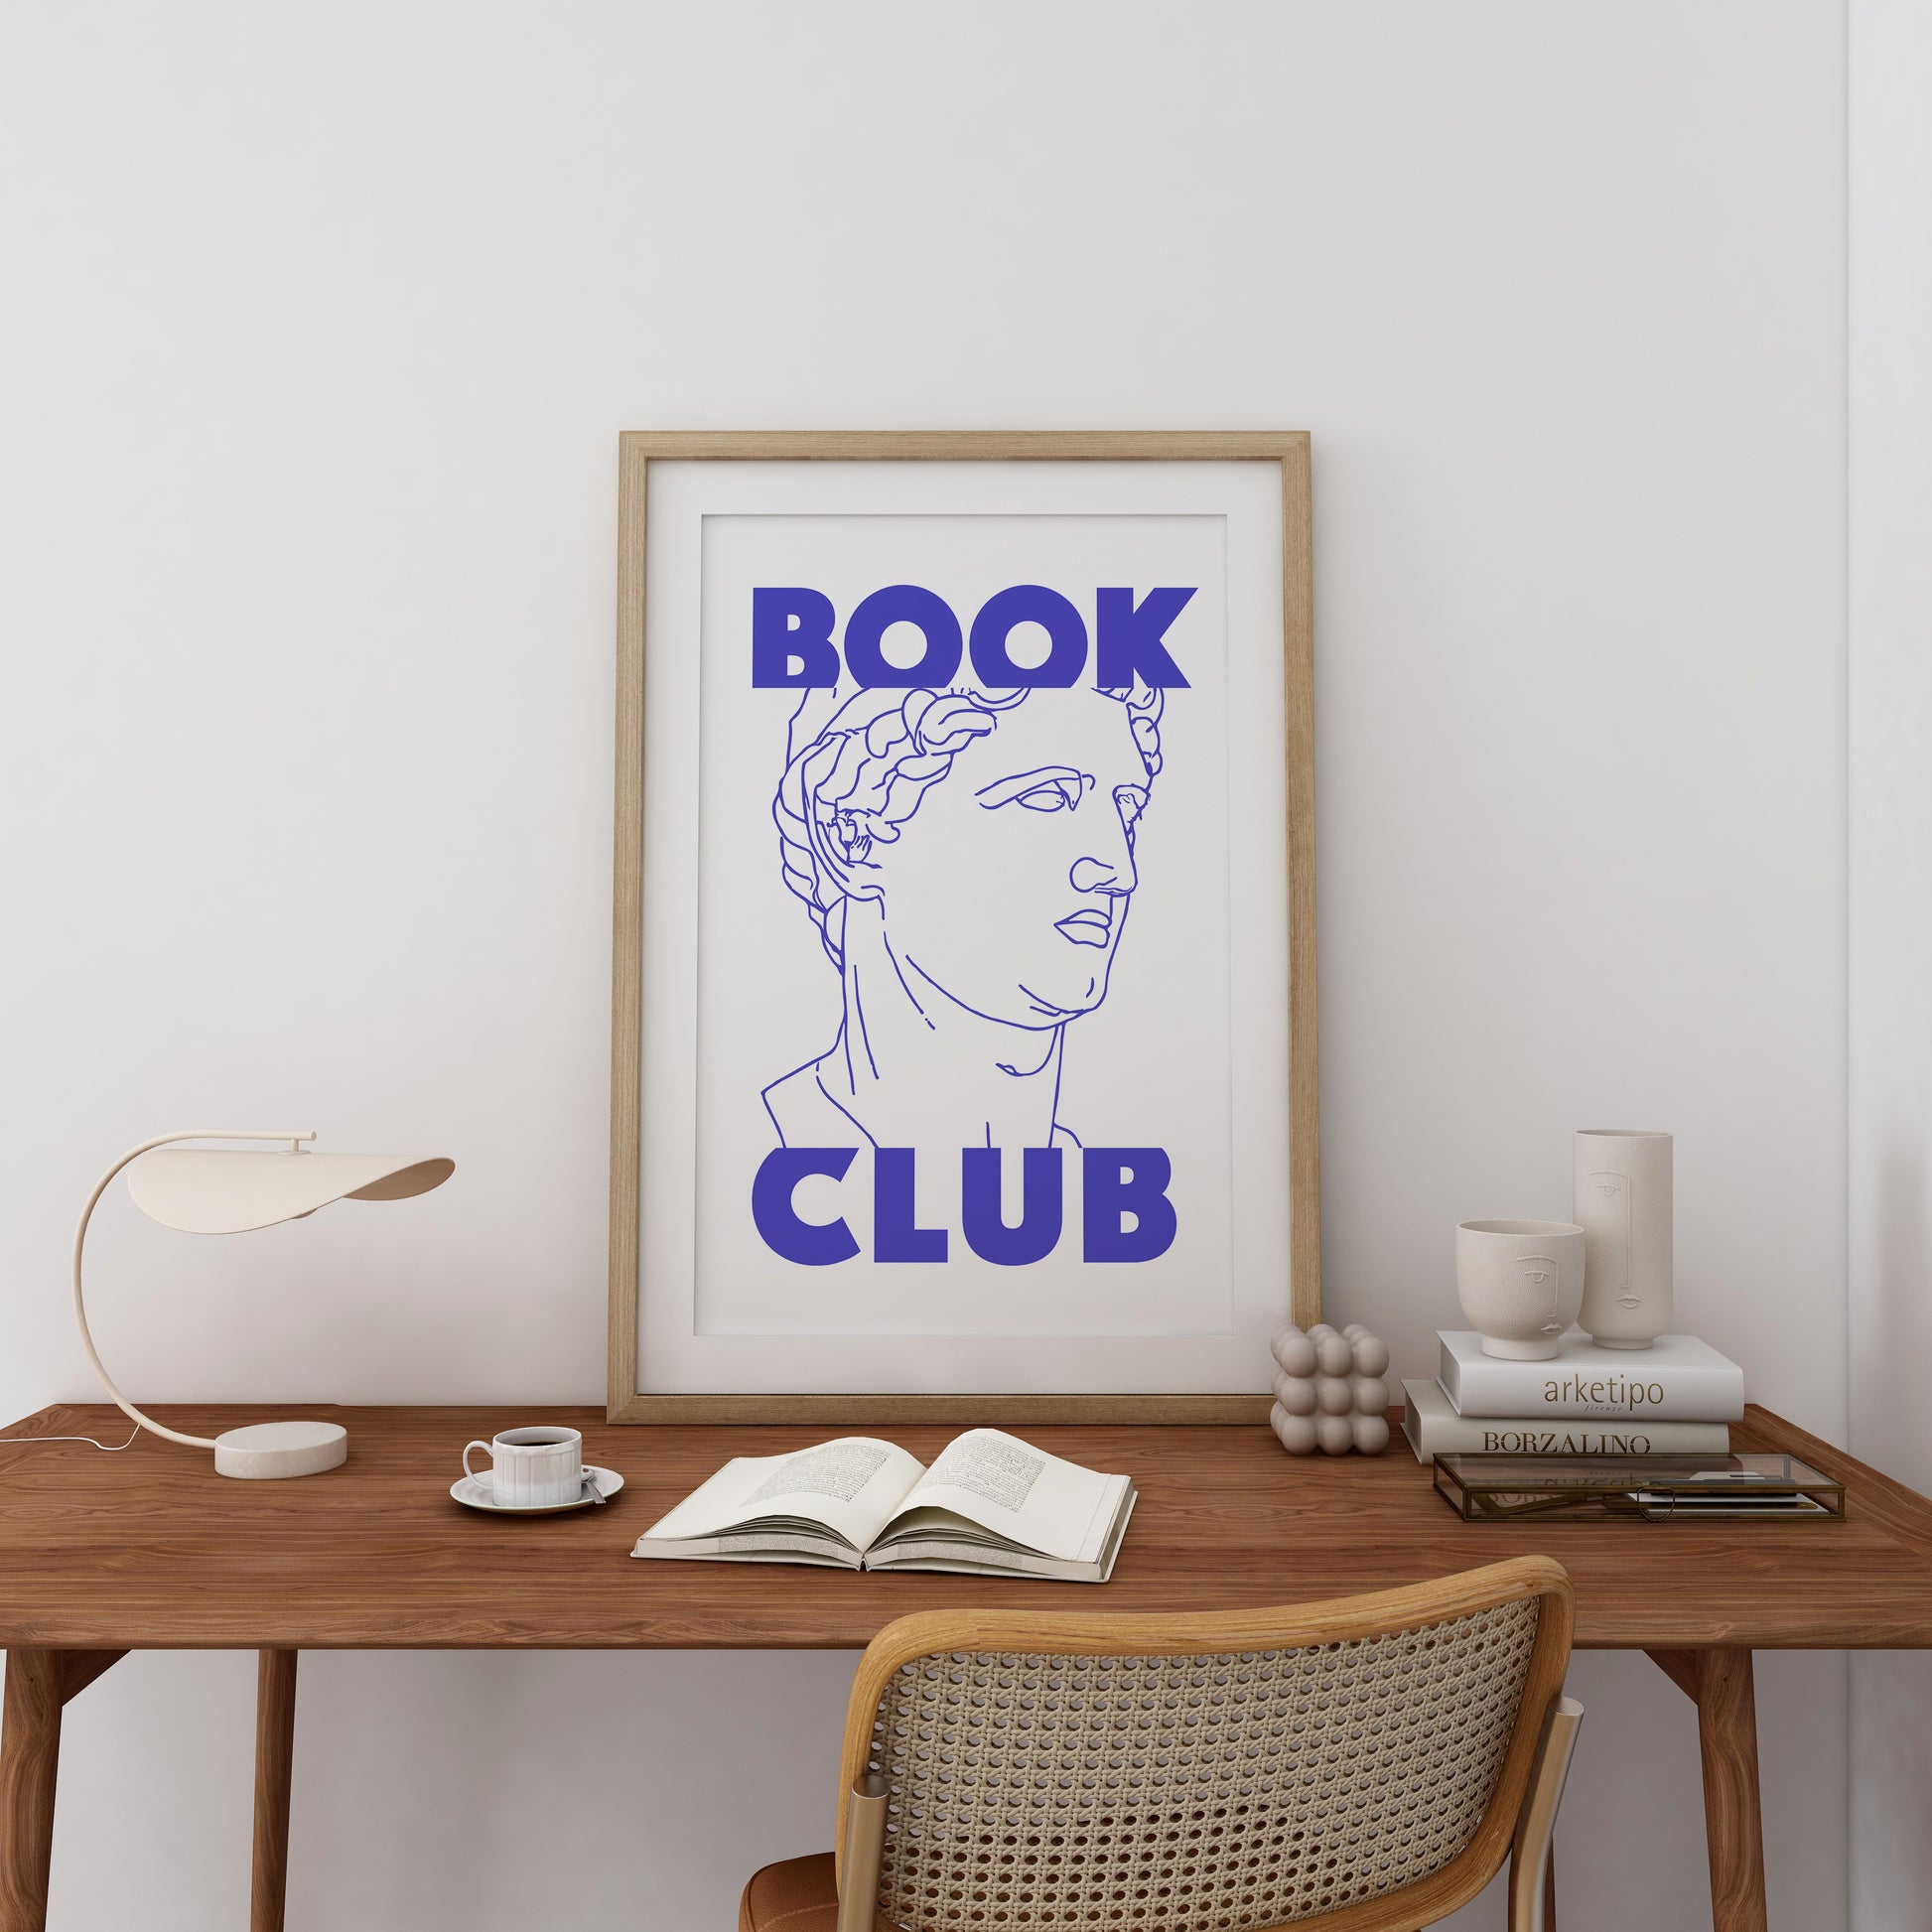 a framed book club poster on a desk